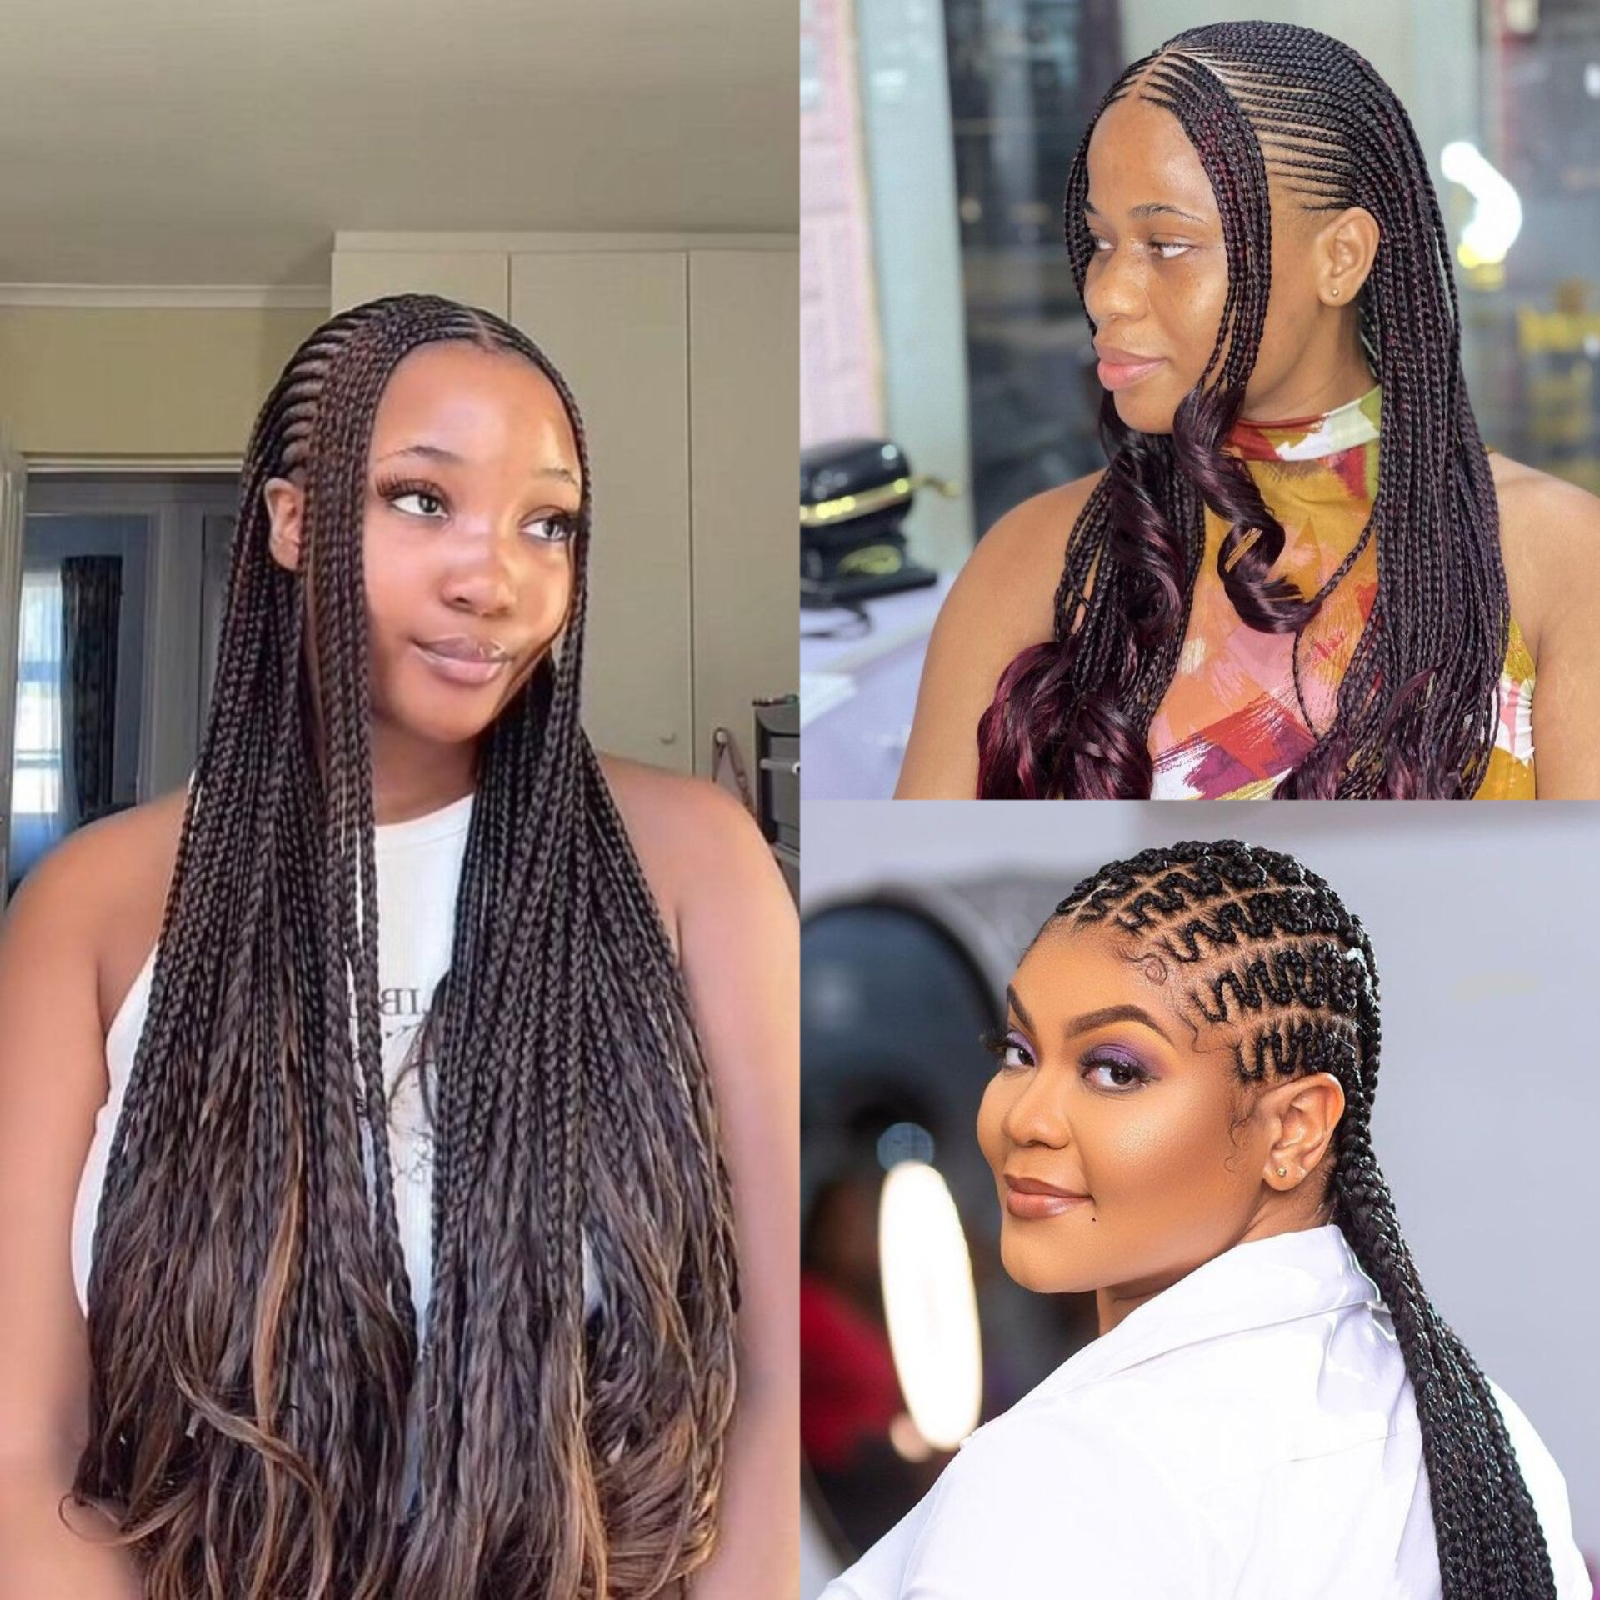 Take Your Look To Next Level, With These Stunning Hairstyles - ToskyFashion